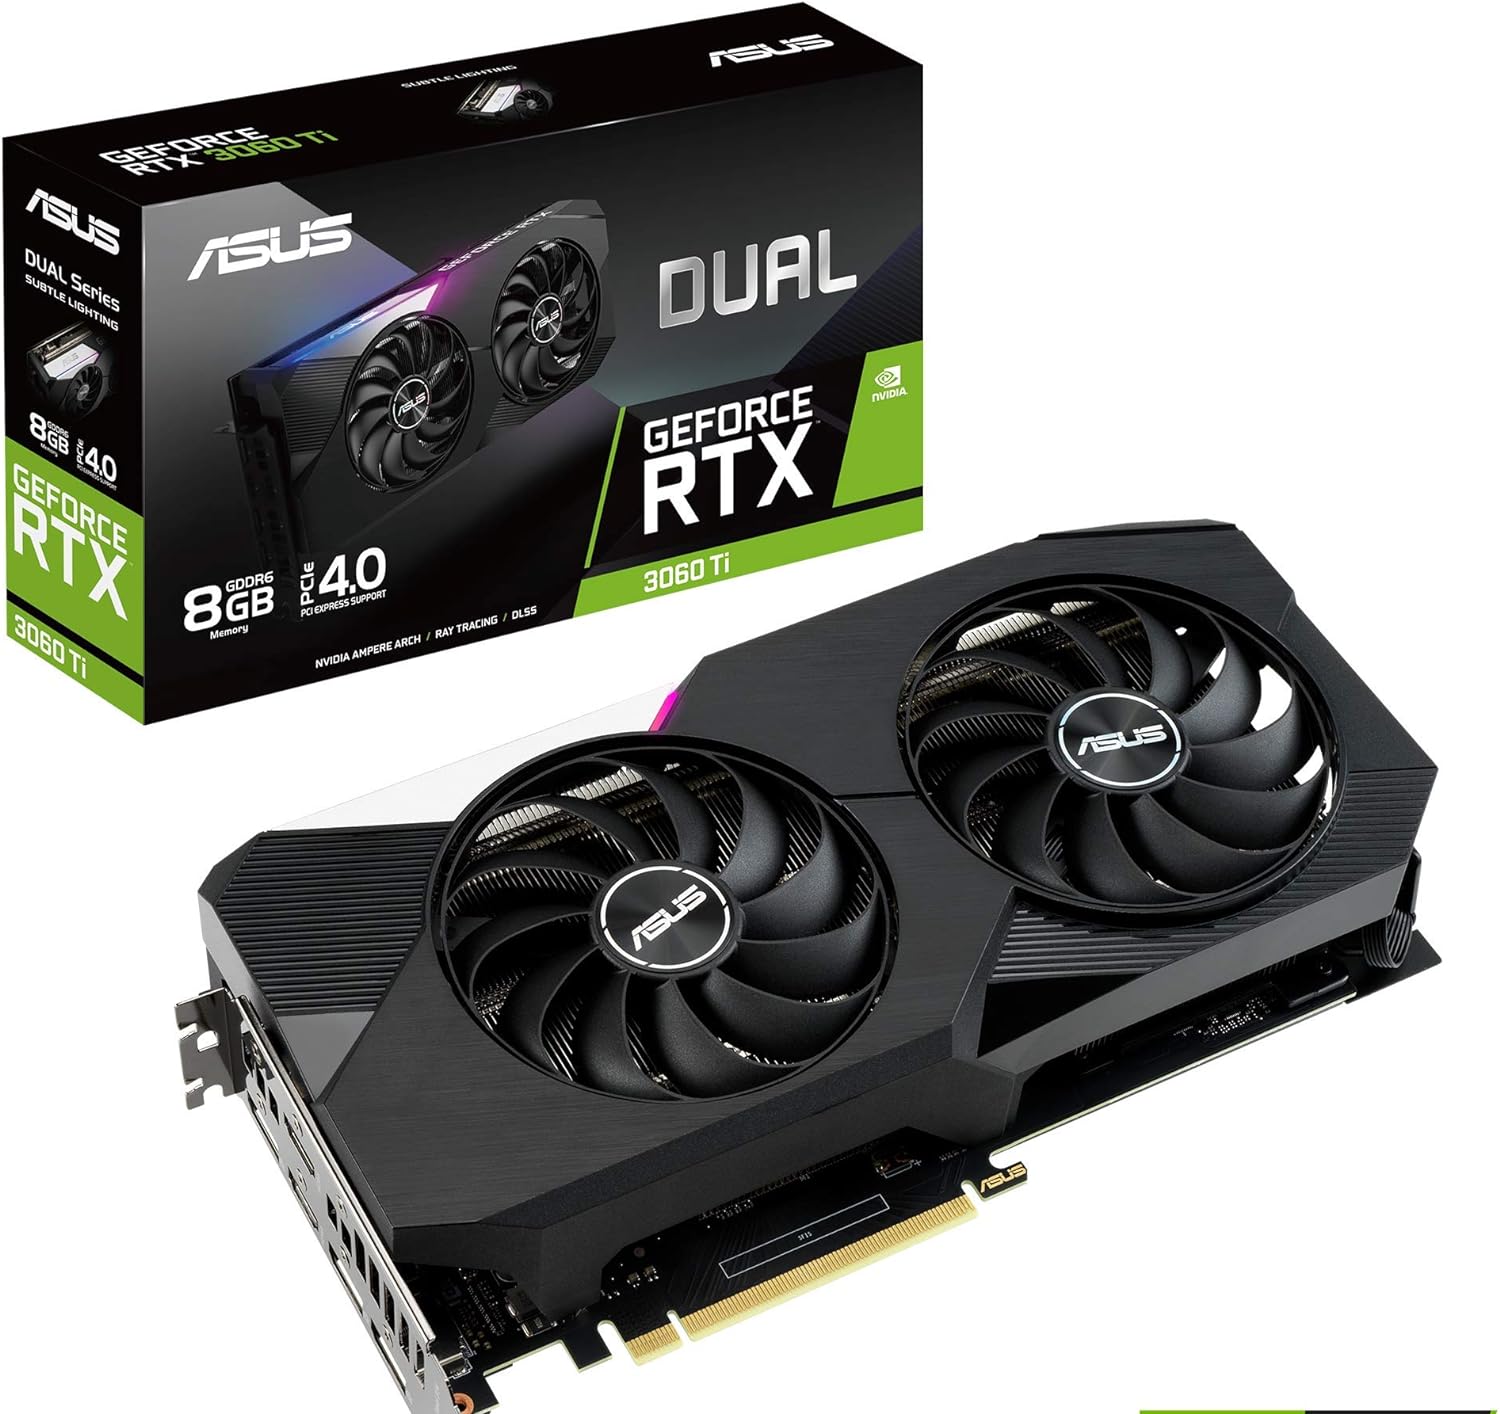 ASUS DUAL NVIDIA GeForce RTX 3060 Ti Graphics Card with Axial-tech Fan Design for improved cooling efficiency. 0192876962985